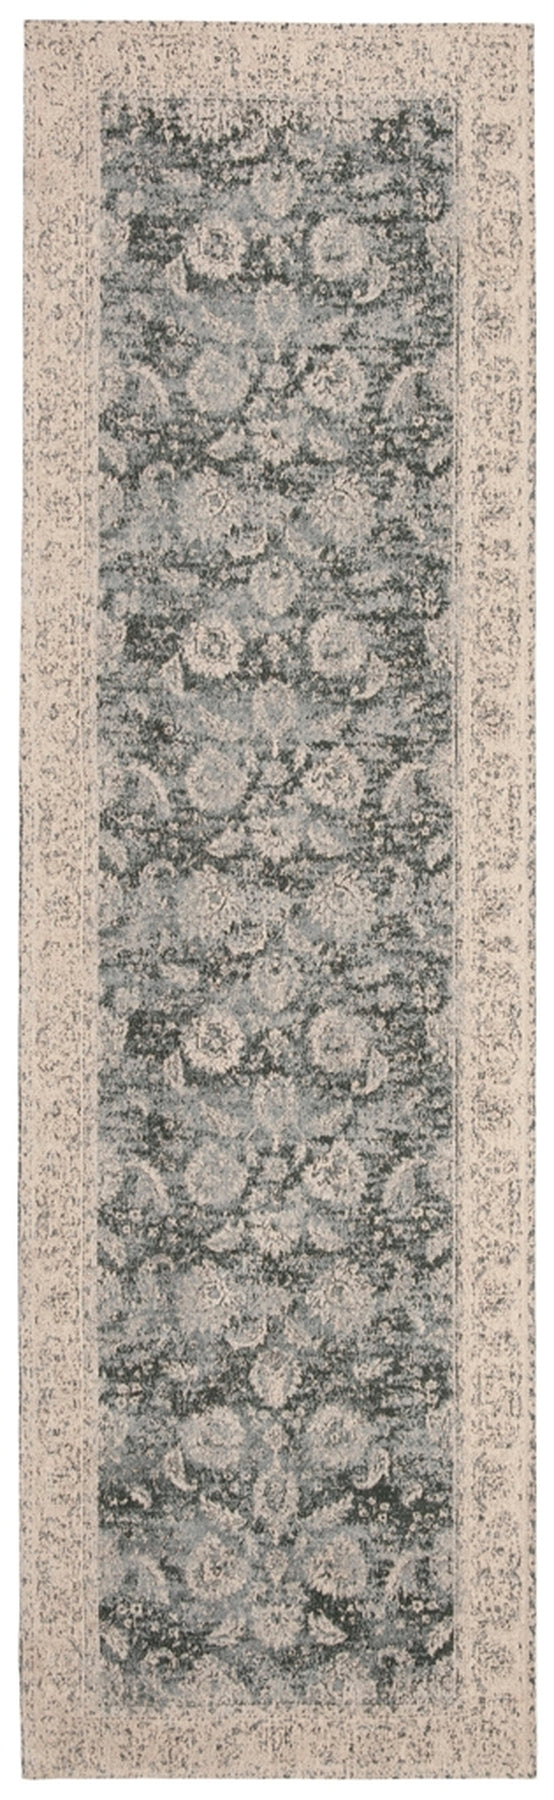 Safavieh Clv-Classic Vintage Power Loomed Cotton Backing Rugs In Cream / Grey